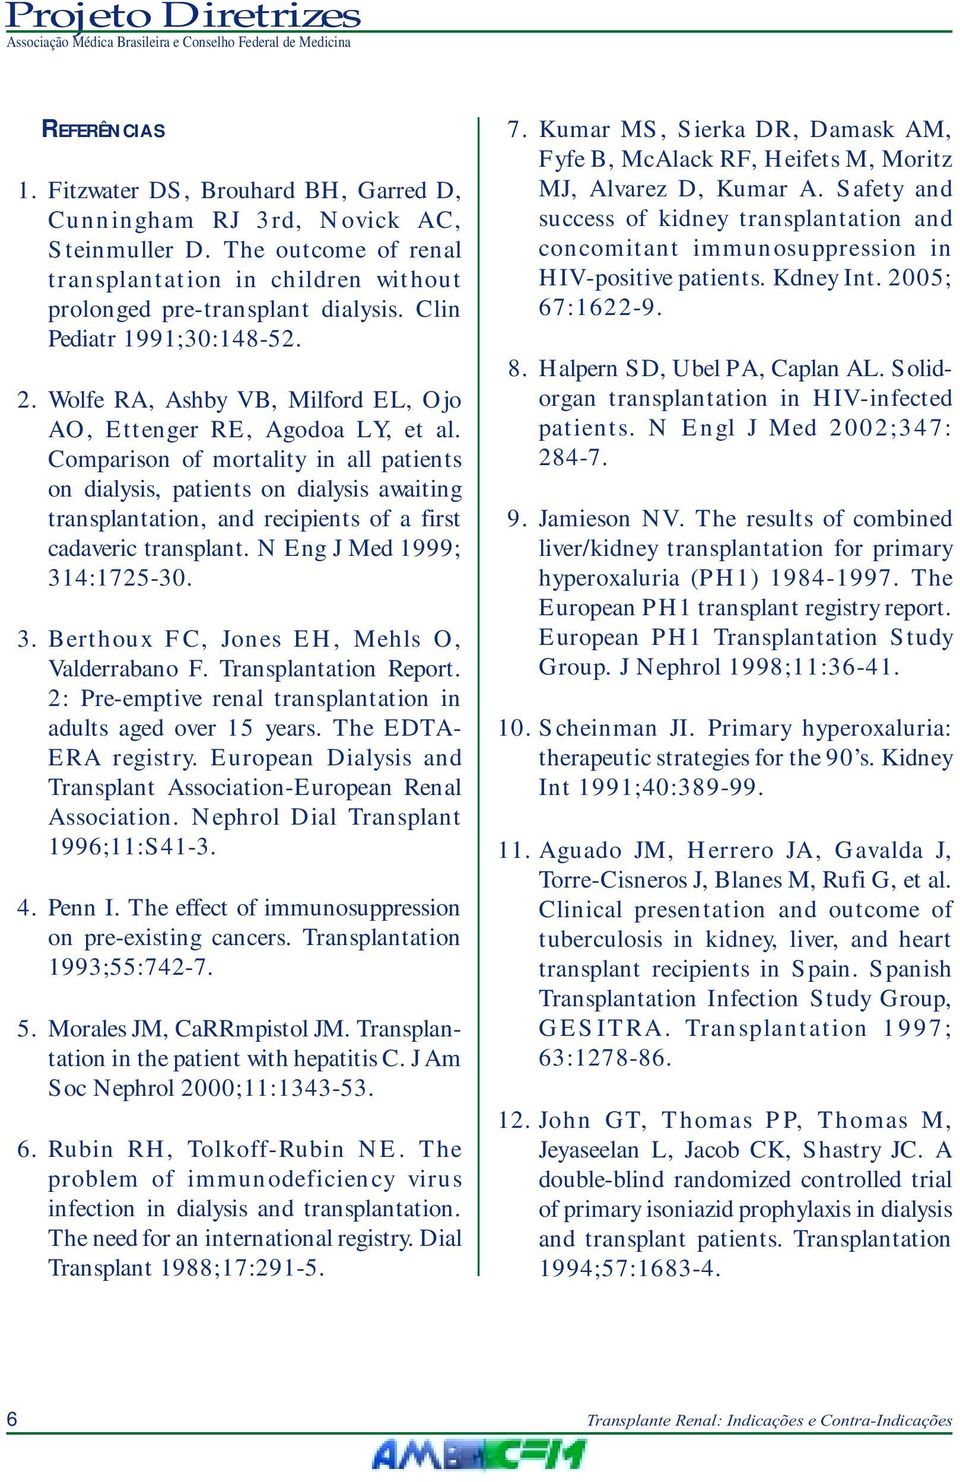 Comparison of mortality in all patients on dialysis, patients on dialysis awaiting transplantation, and recipients of a first cadaveric transplant. N Eng J Med 1999; 31